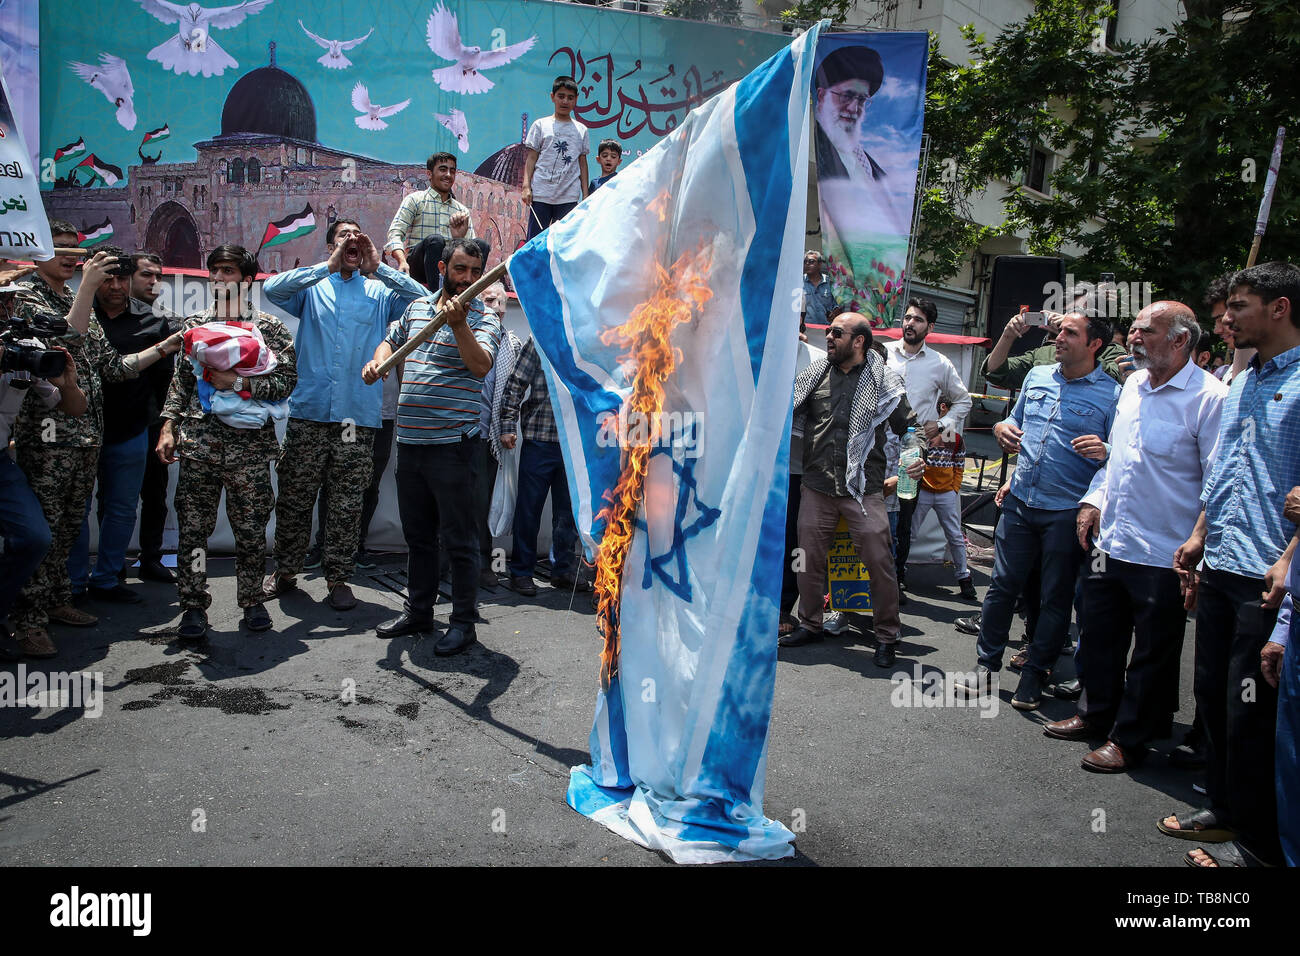 Tehran, Iran. 31st May, 2019. An Iranian man burns the Israeli flag during a protest marking the annual al-Quds Day (Jerusalem Day) on the last Friday of the Muslim holy month of Ramadan. Credit: Saeid Zareian/dpa/Alamy Live News Stock Photo